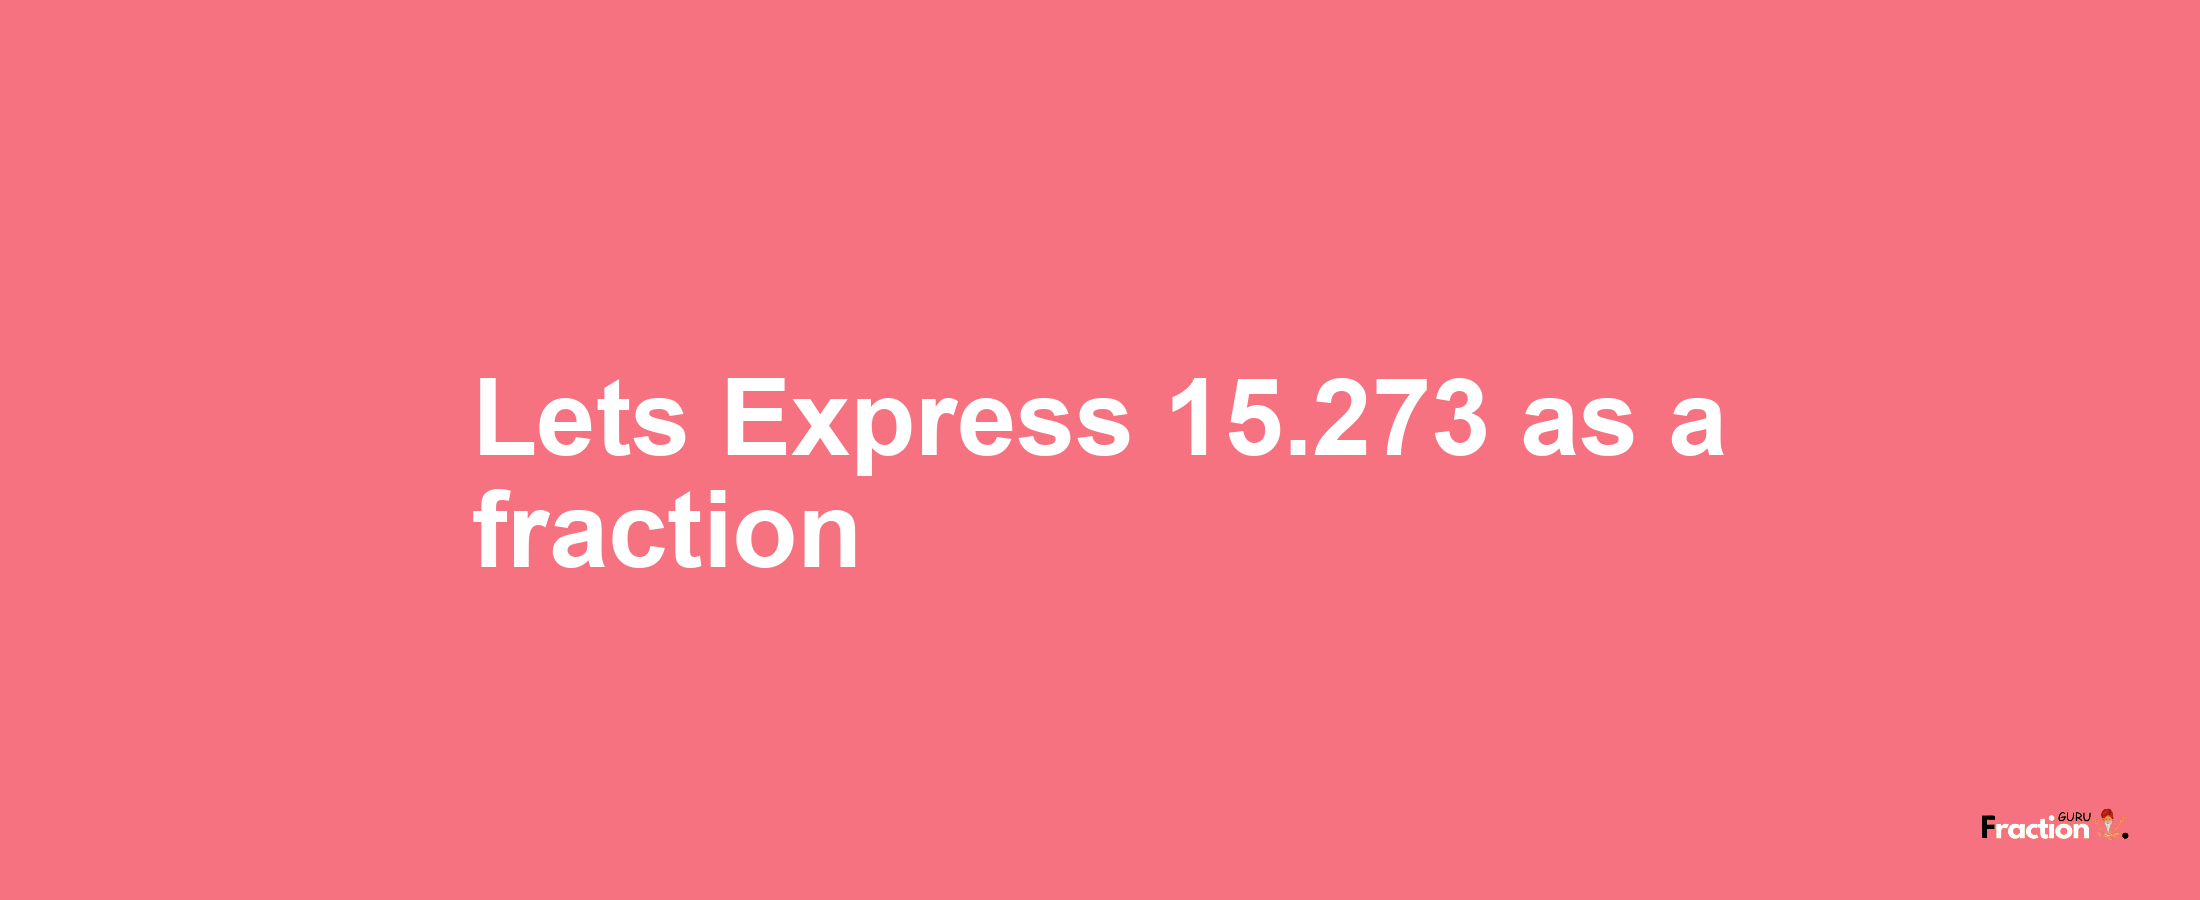 Lets Express 15.273 as afraction